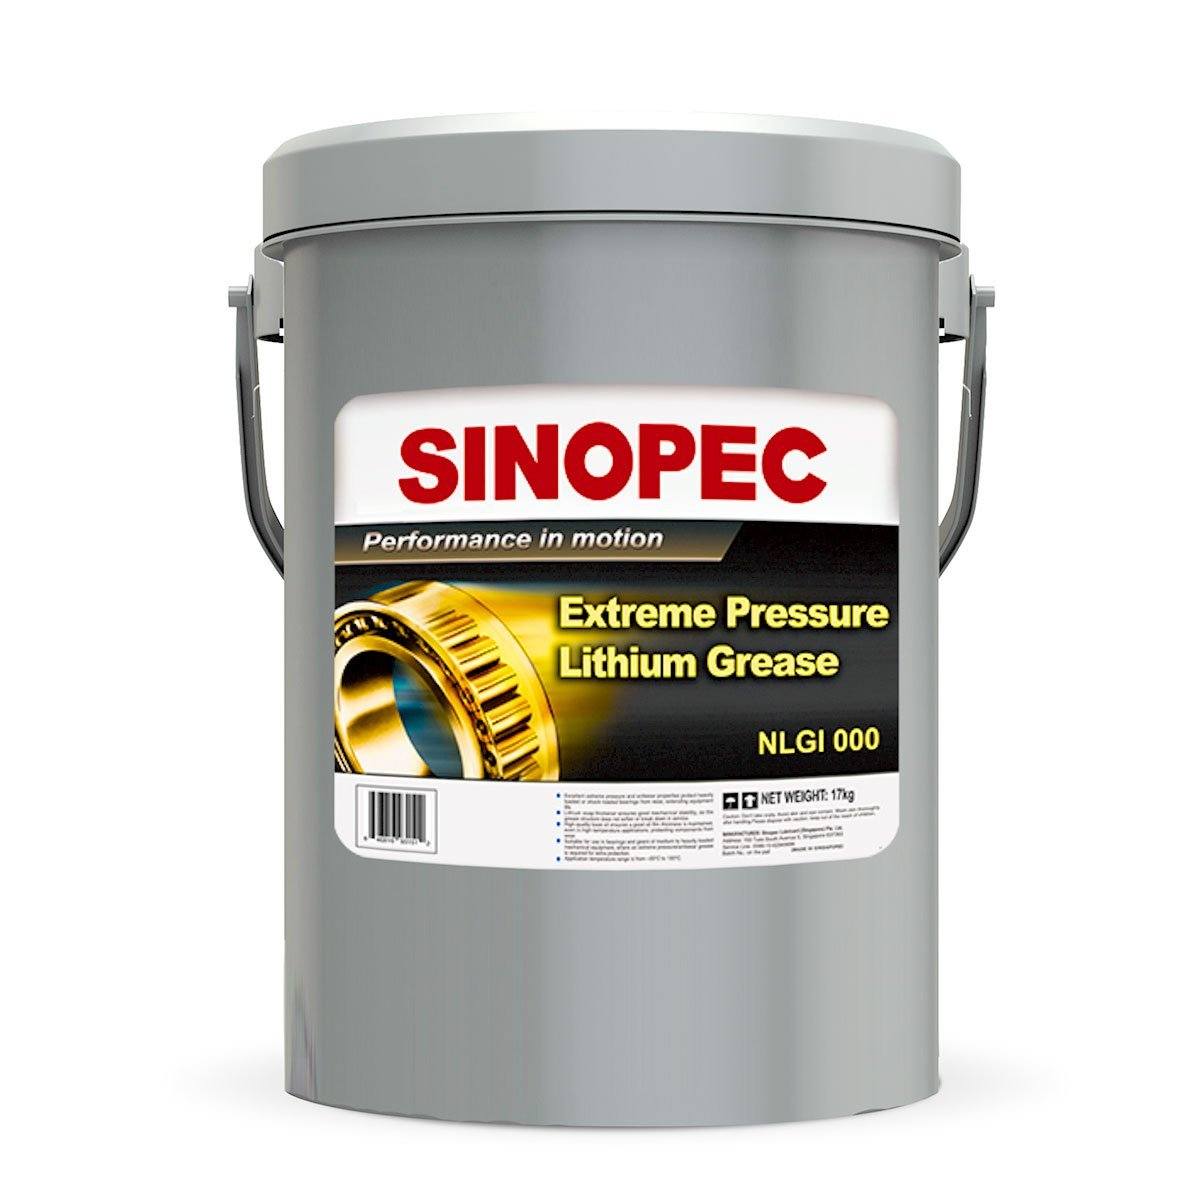 EP000 Lithium Grease-SINOPEC-Brand_Sinopec,Category_Grease,Grade_NLGI 000,sinopec,Size_35 LB Pail,spindle grease,Type_Extreme Pressure